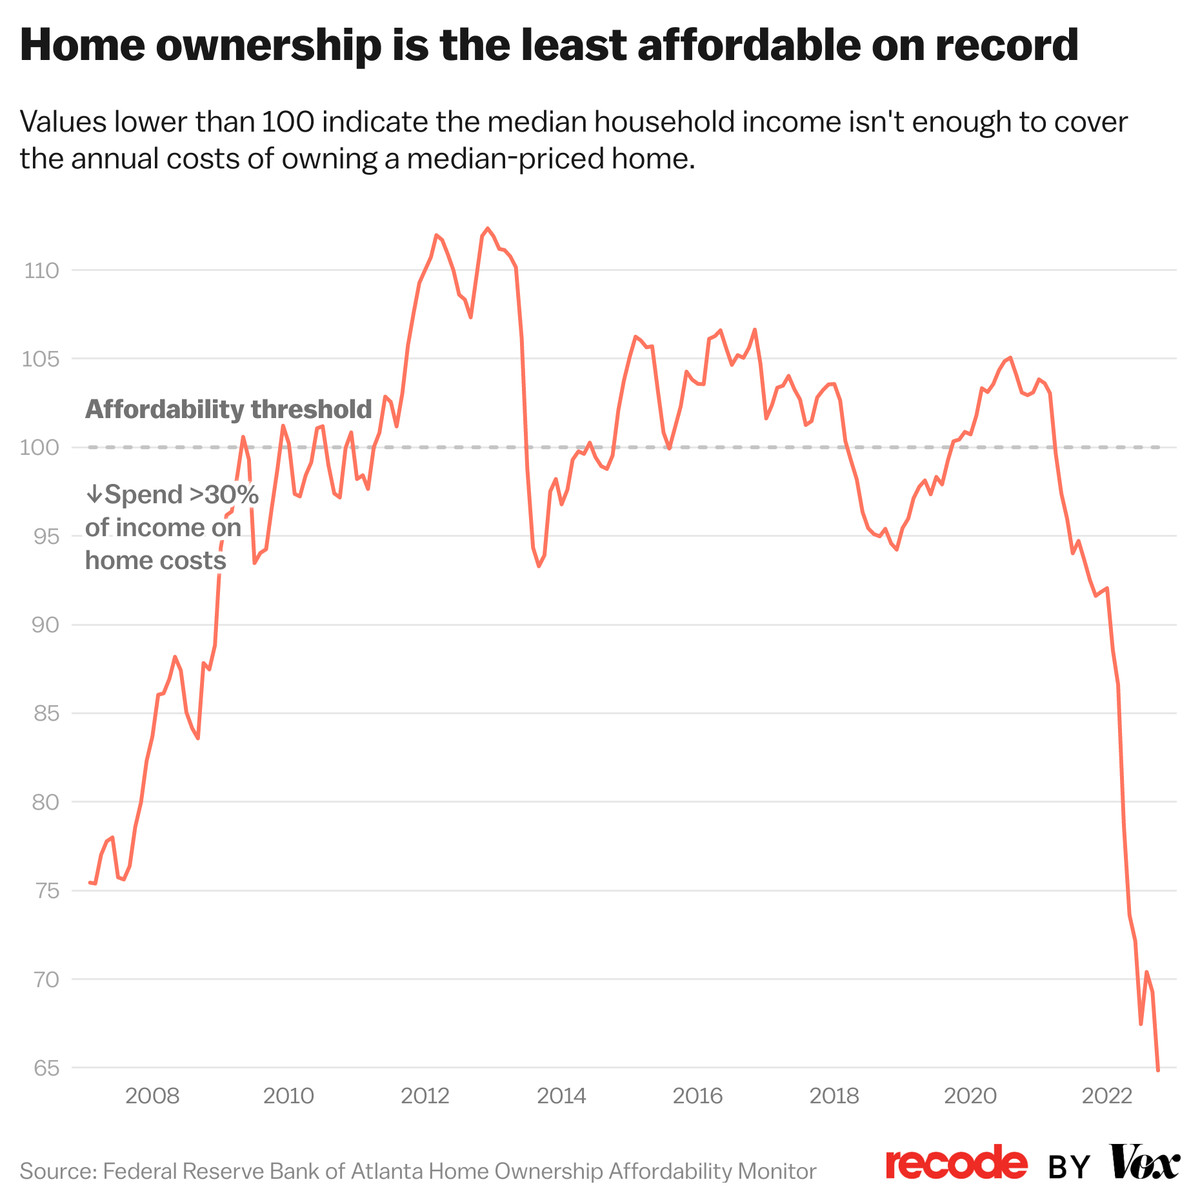 7ysSN home ownership is the least affordable on record